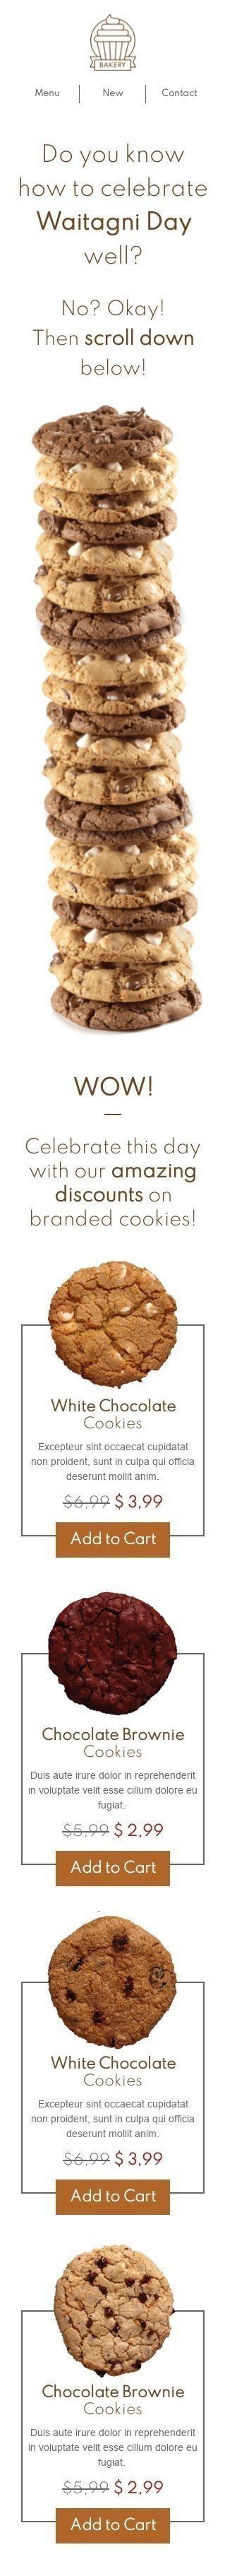 Waitangi Day Email Template "Branded cookies" for Food industry mobile view